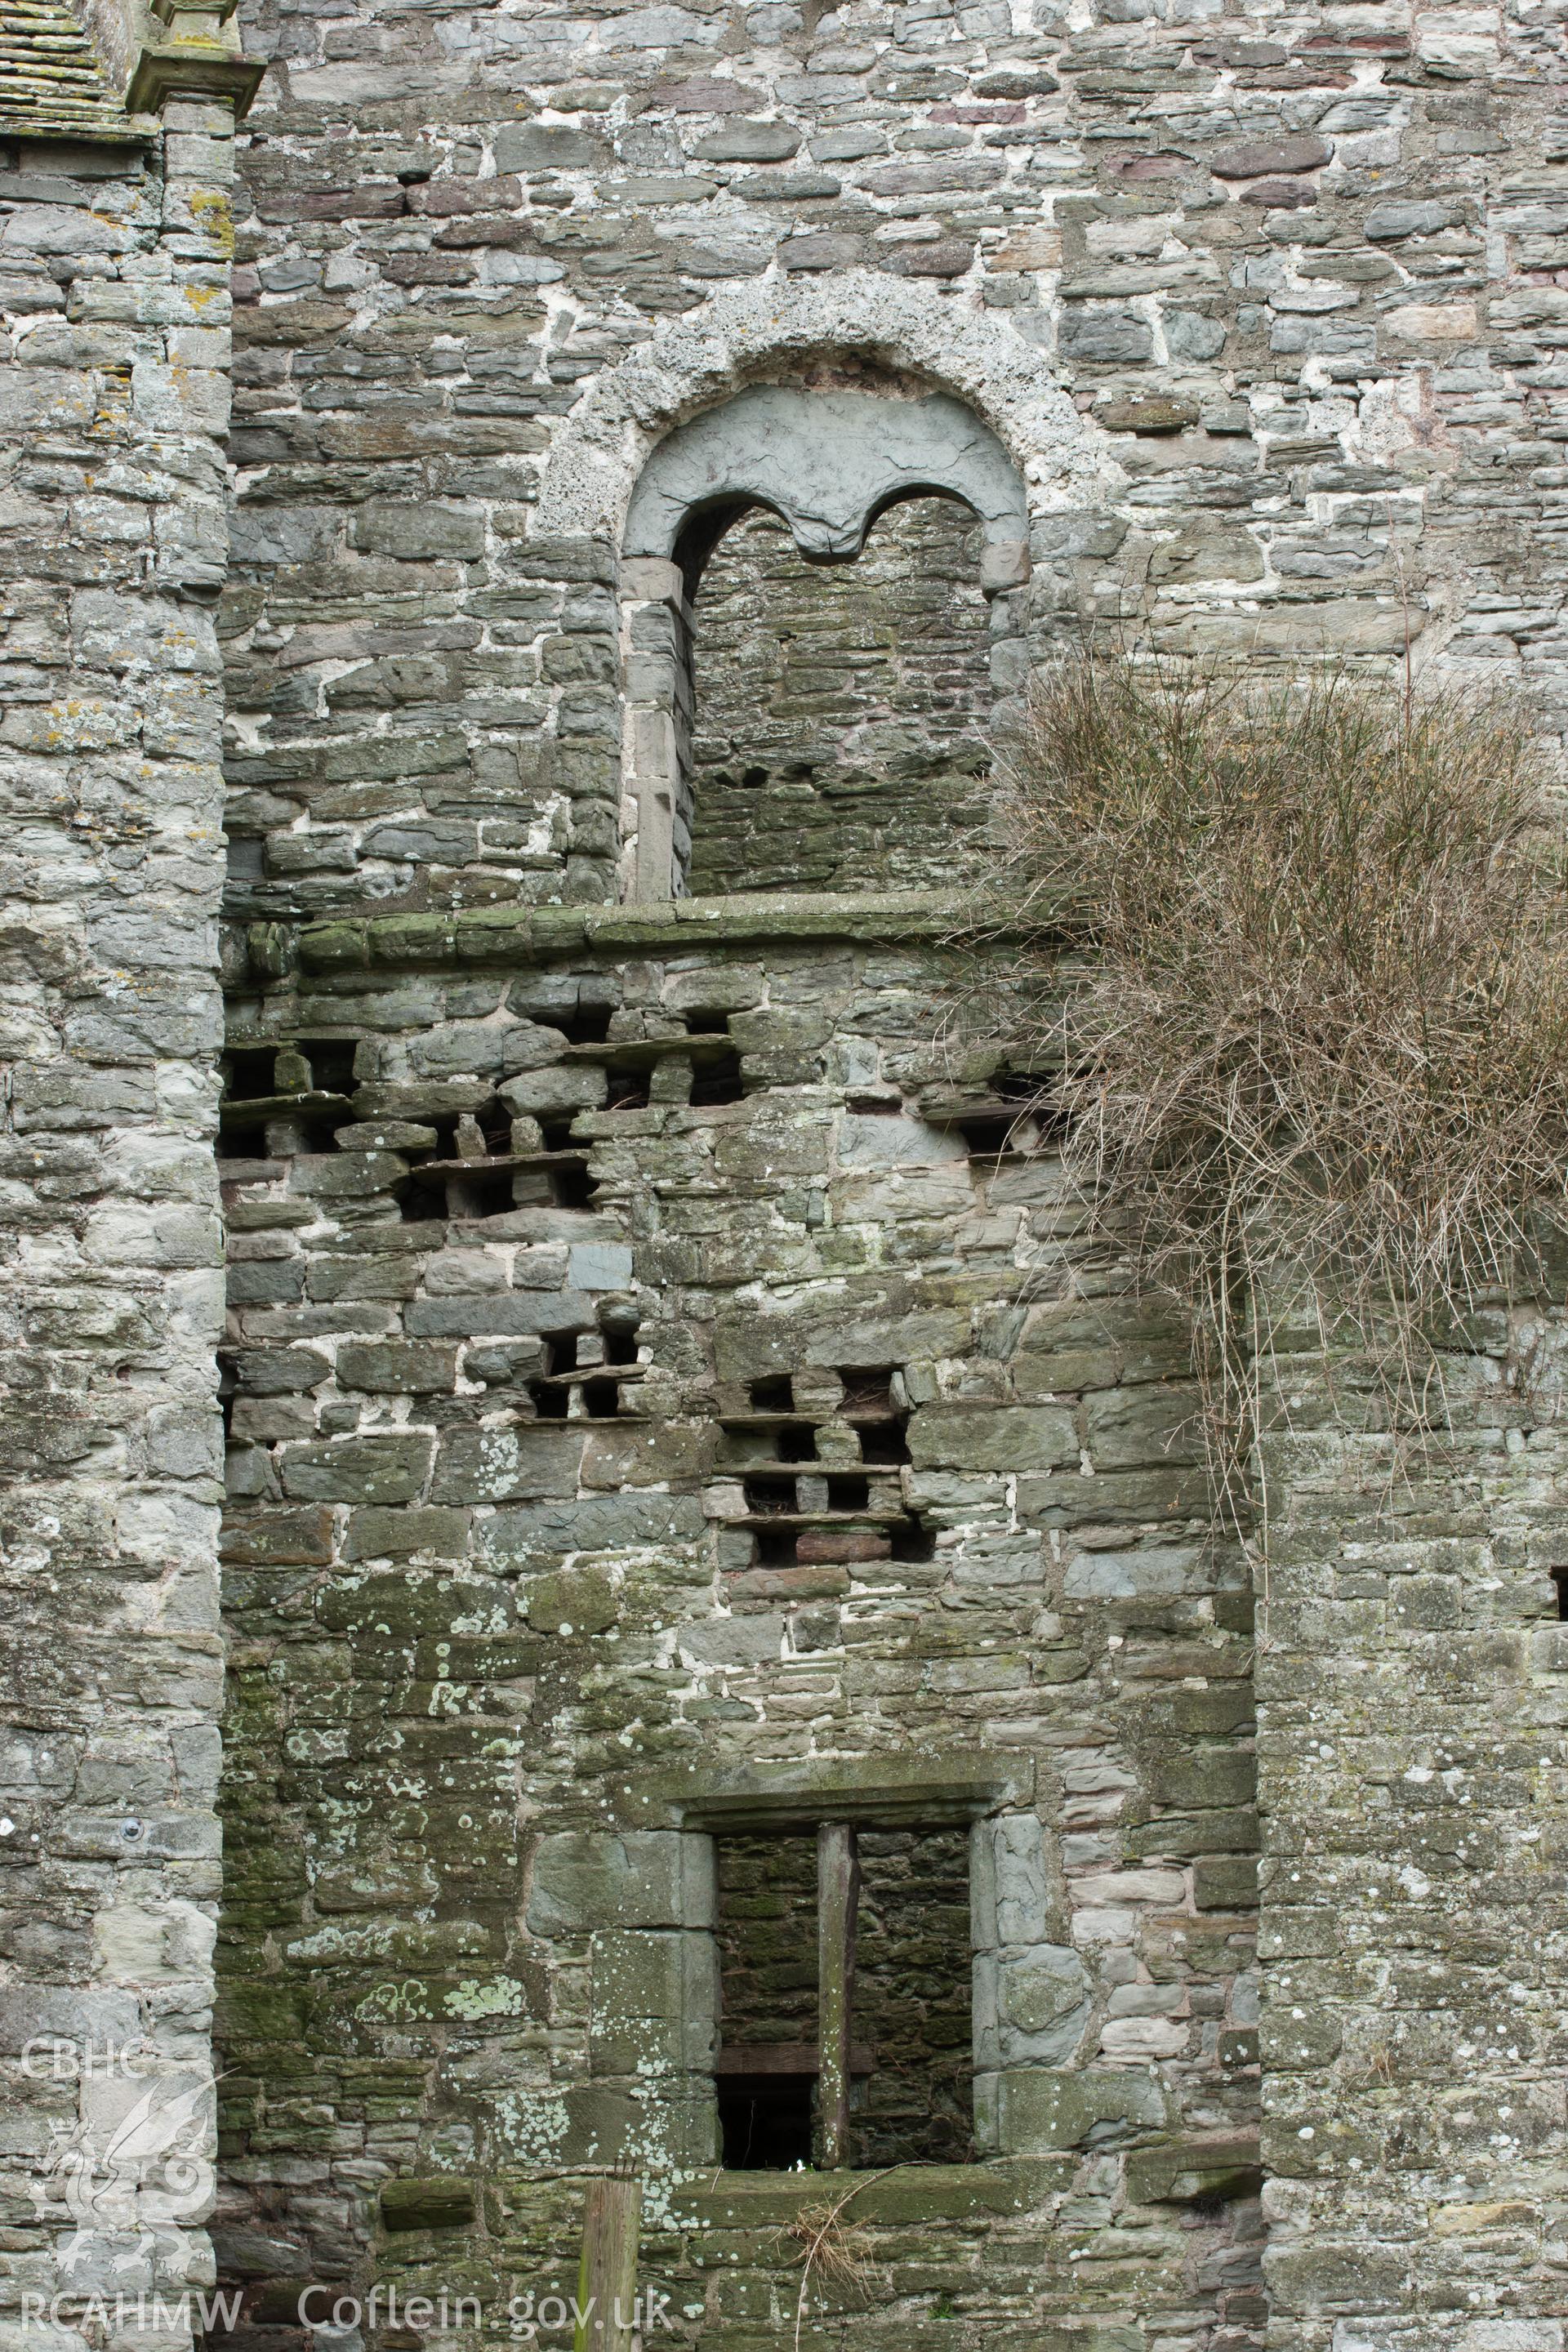 Detail of arched window and pigeon roosts in Keep.